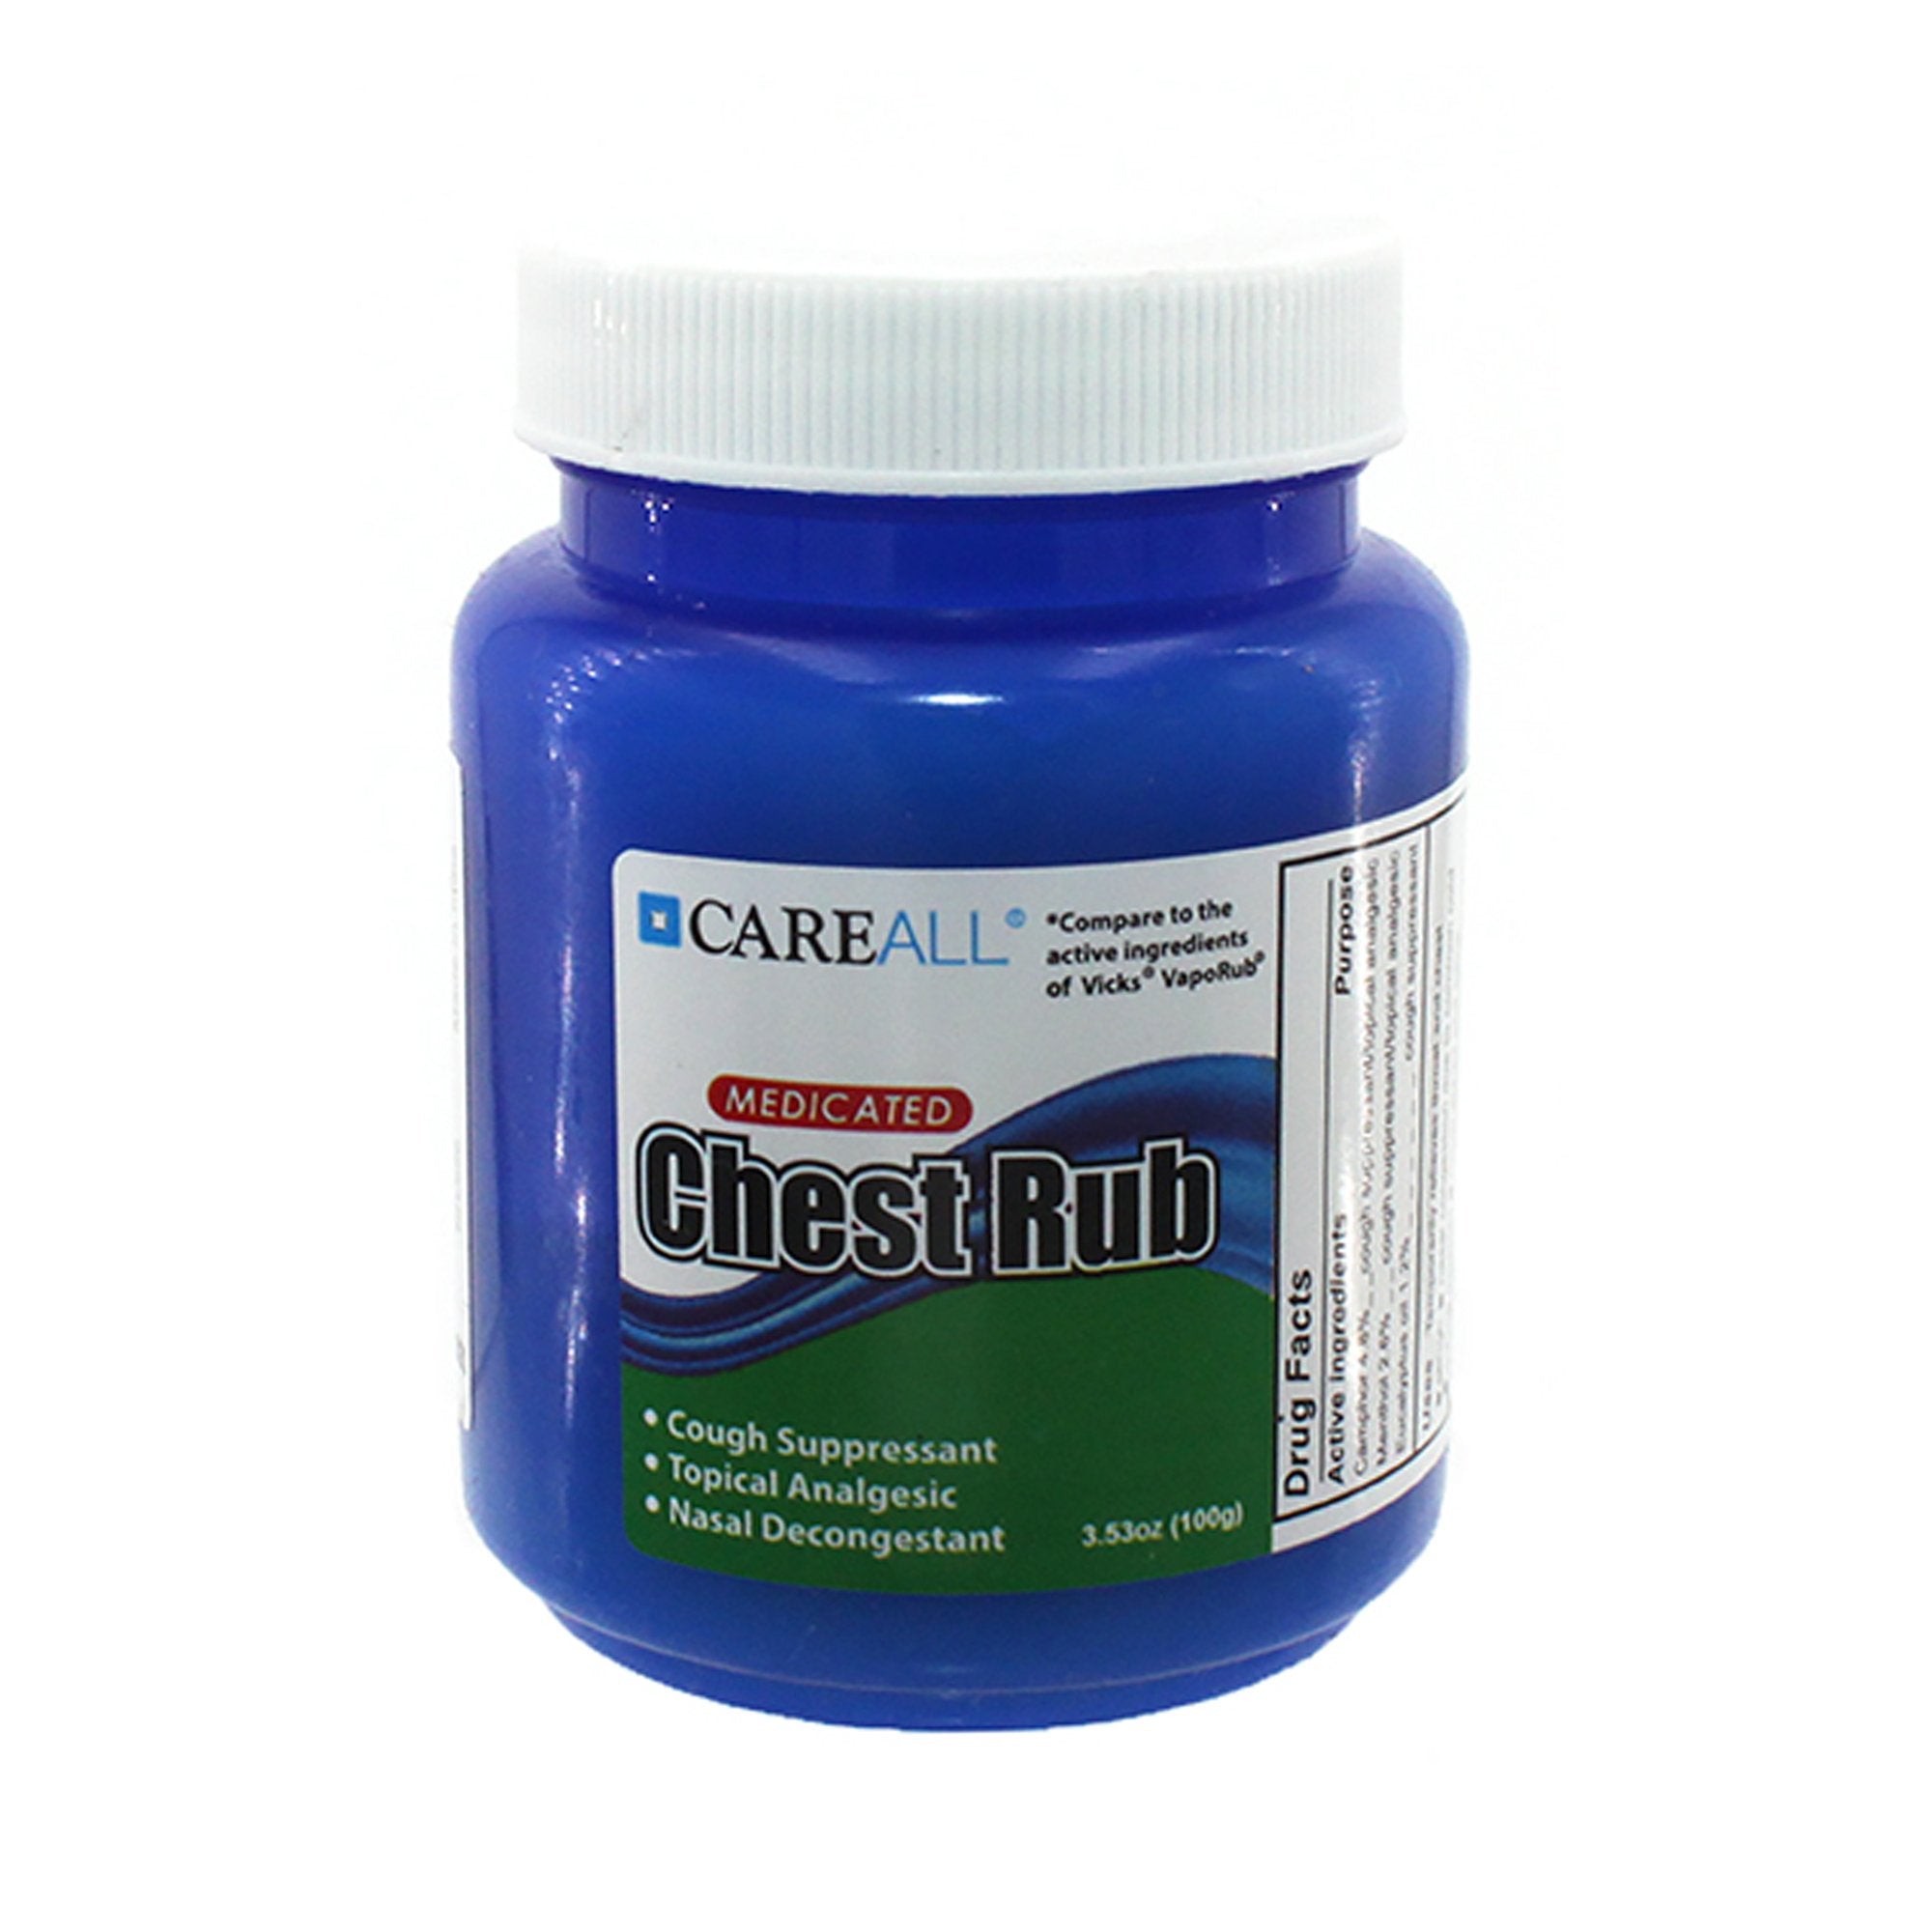 Chest Rub CareAll® 4.8% - 1.2% - 2.6% Strength Ointment 3.53 oz.